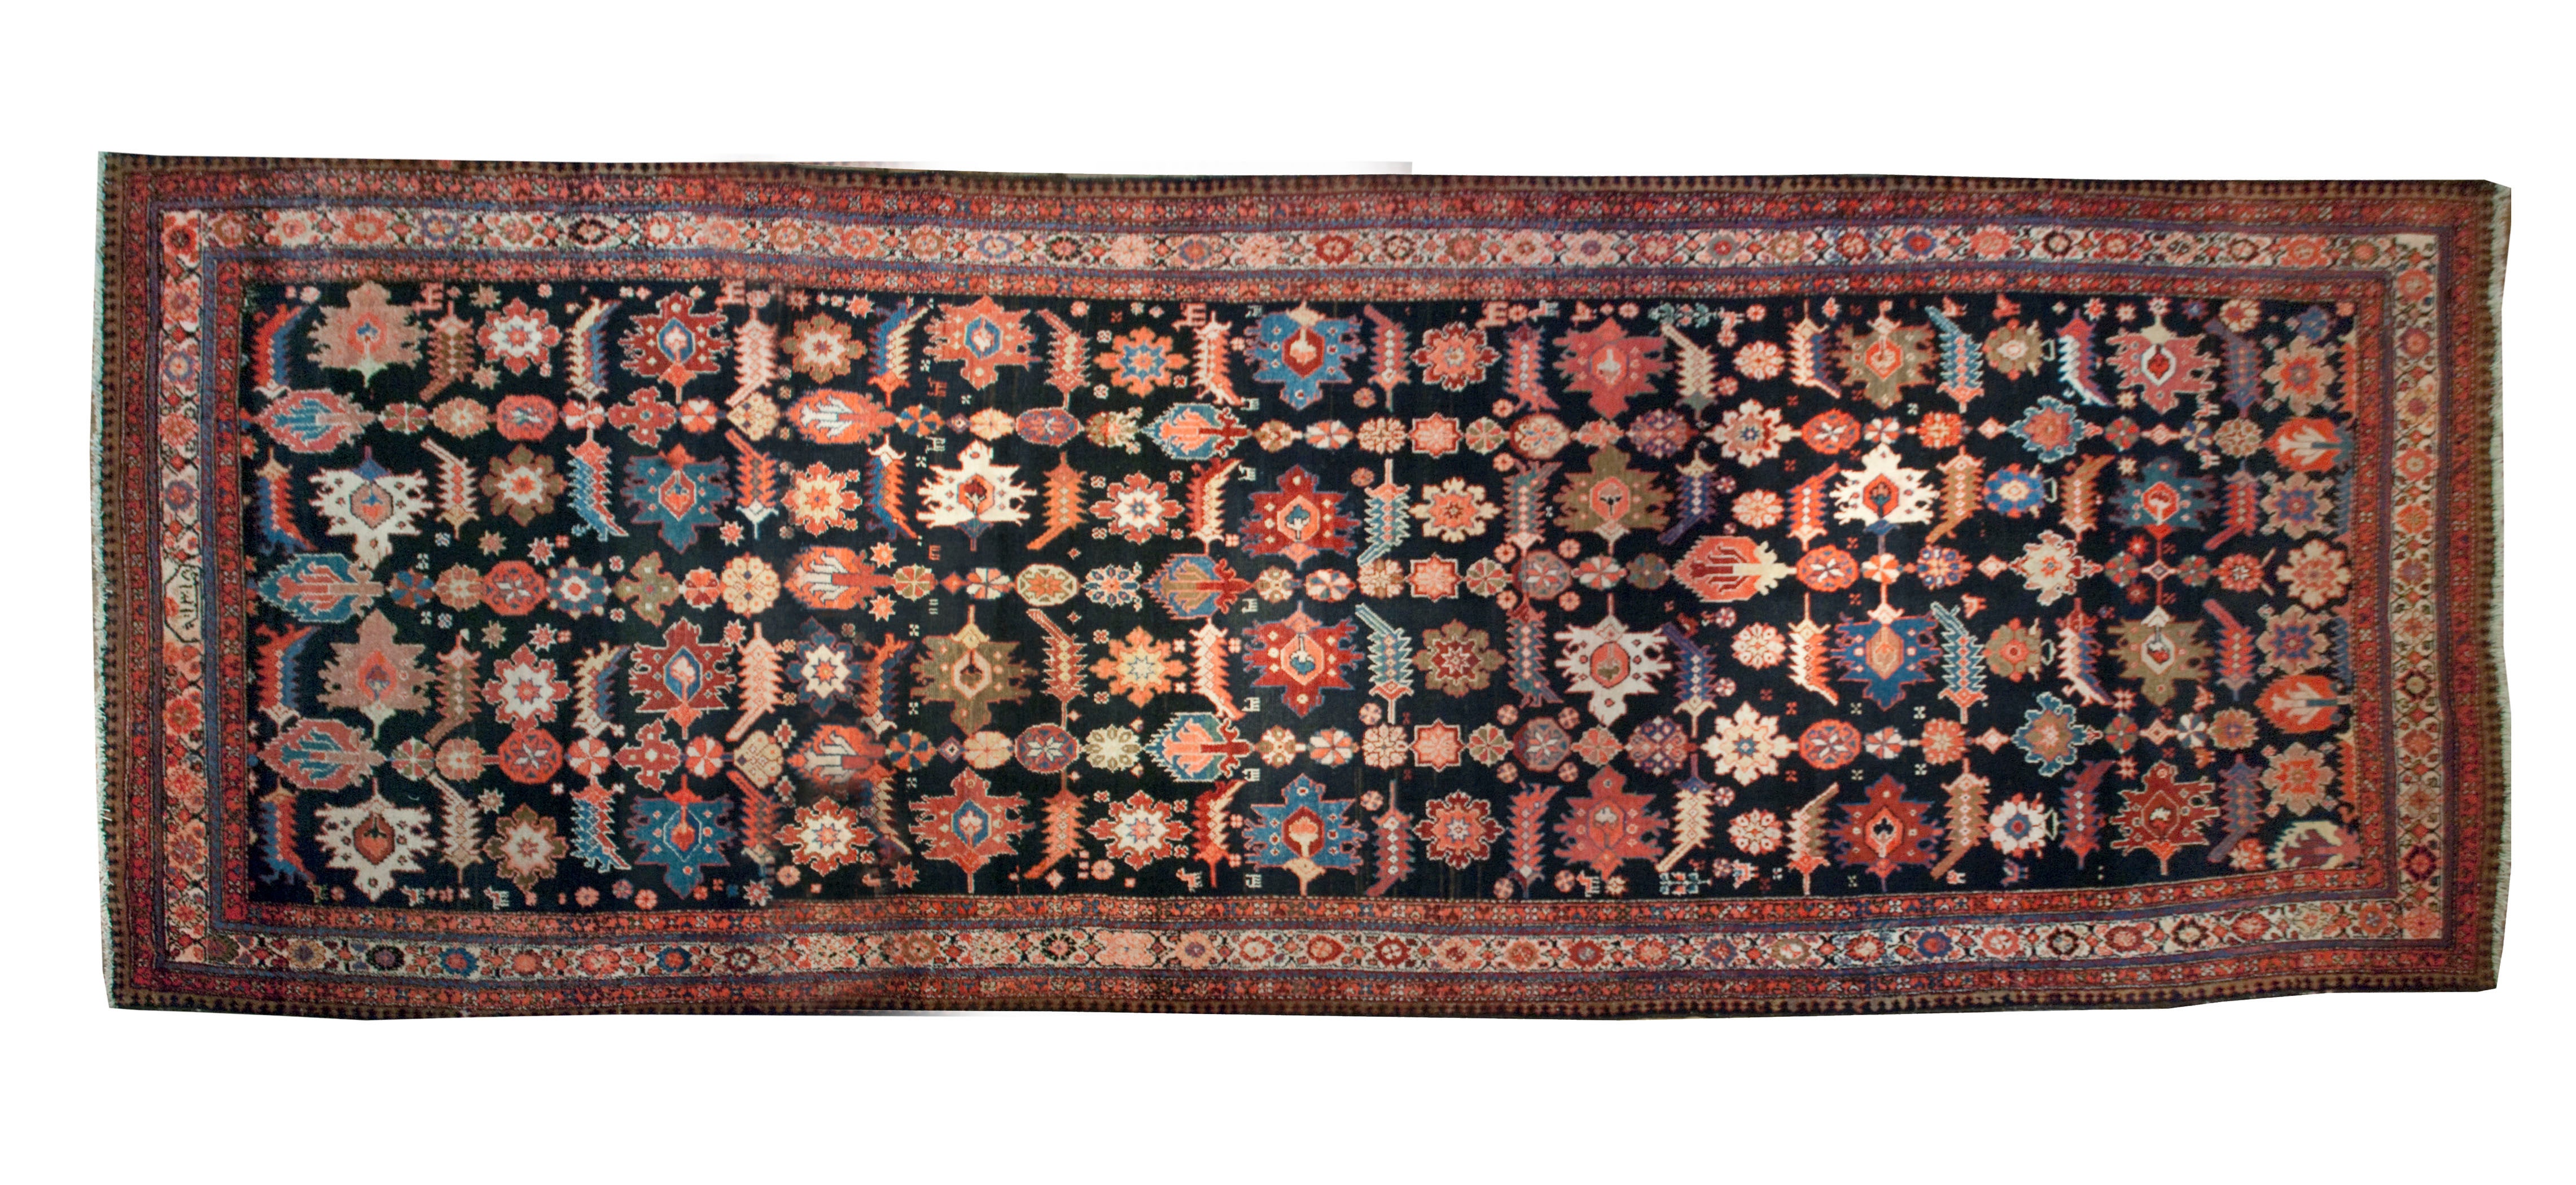 Early 20th Century Persian Malayer Carpet Runner